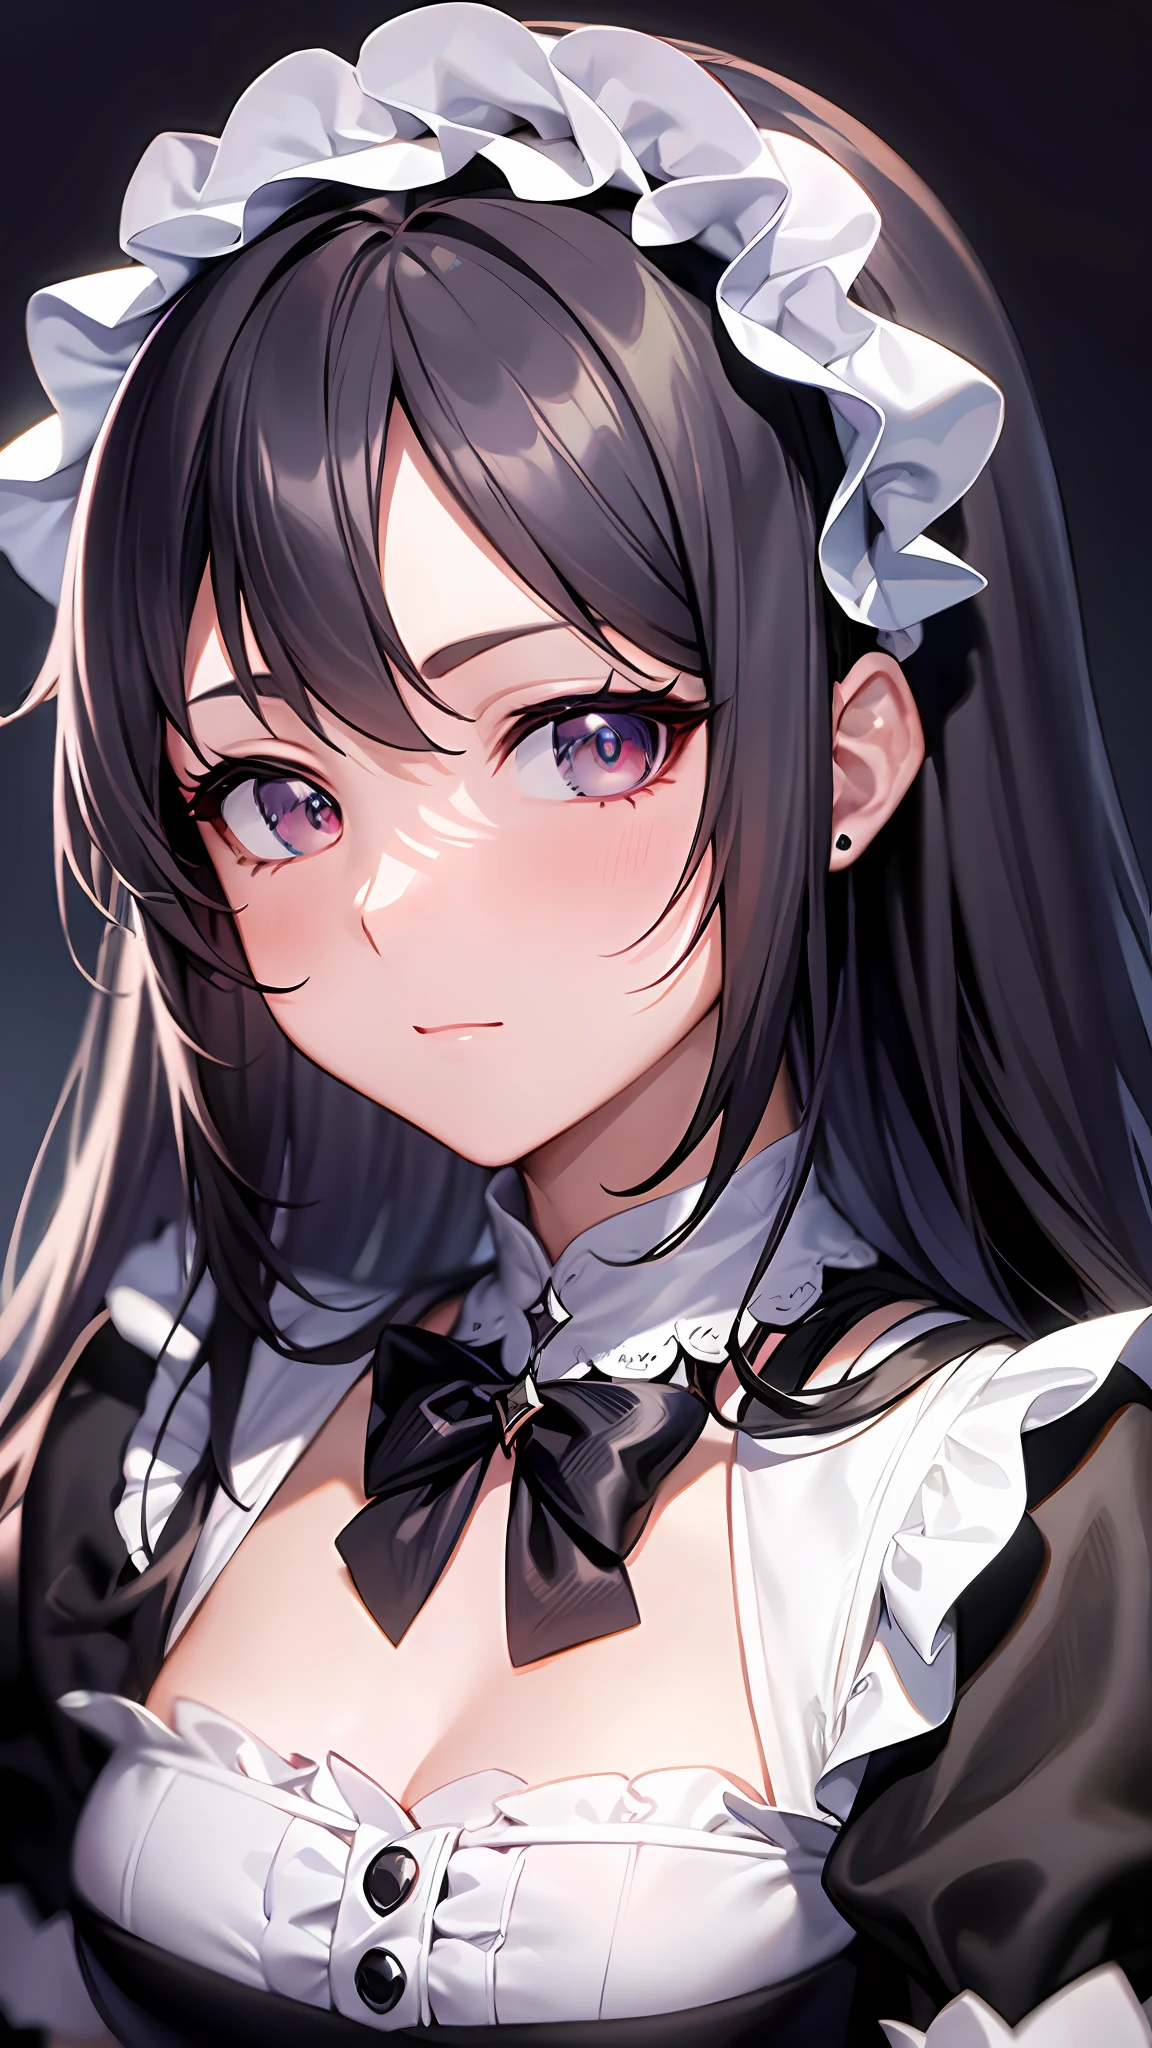 Close up portrait of woman in dress in white and black dress、Gothic Otome anime girl、anime girl wearing a black dress、Cute anime waifu in a nice dress、Anime girl in maid costume、Elegant Gothic princess、guweiz、Gwaits at Pixiv Art Station、Gwaitz at Art Station pixiv、Beautiful anime girl、Embarrassed look